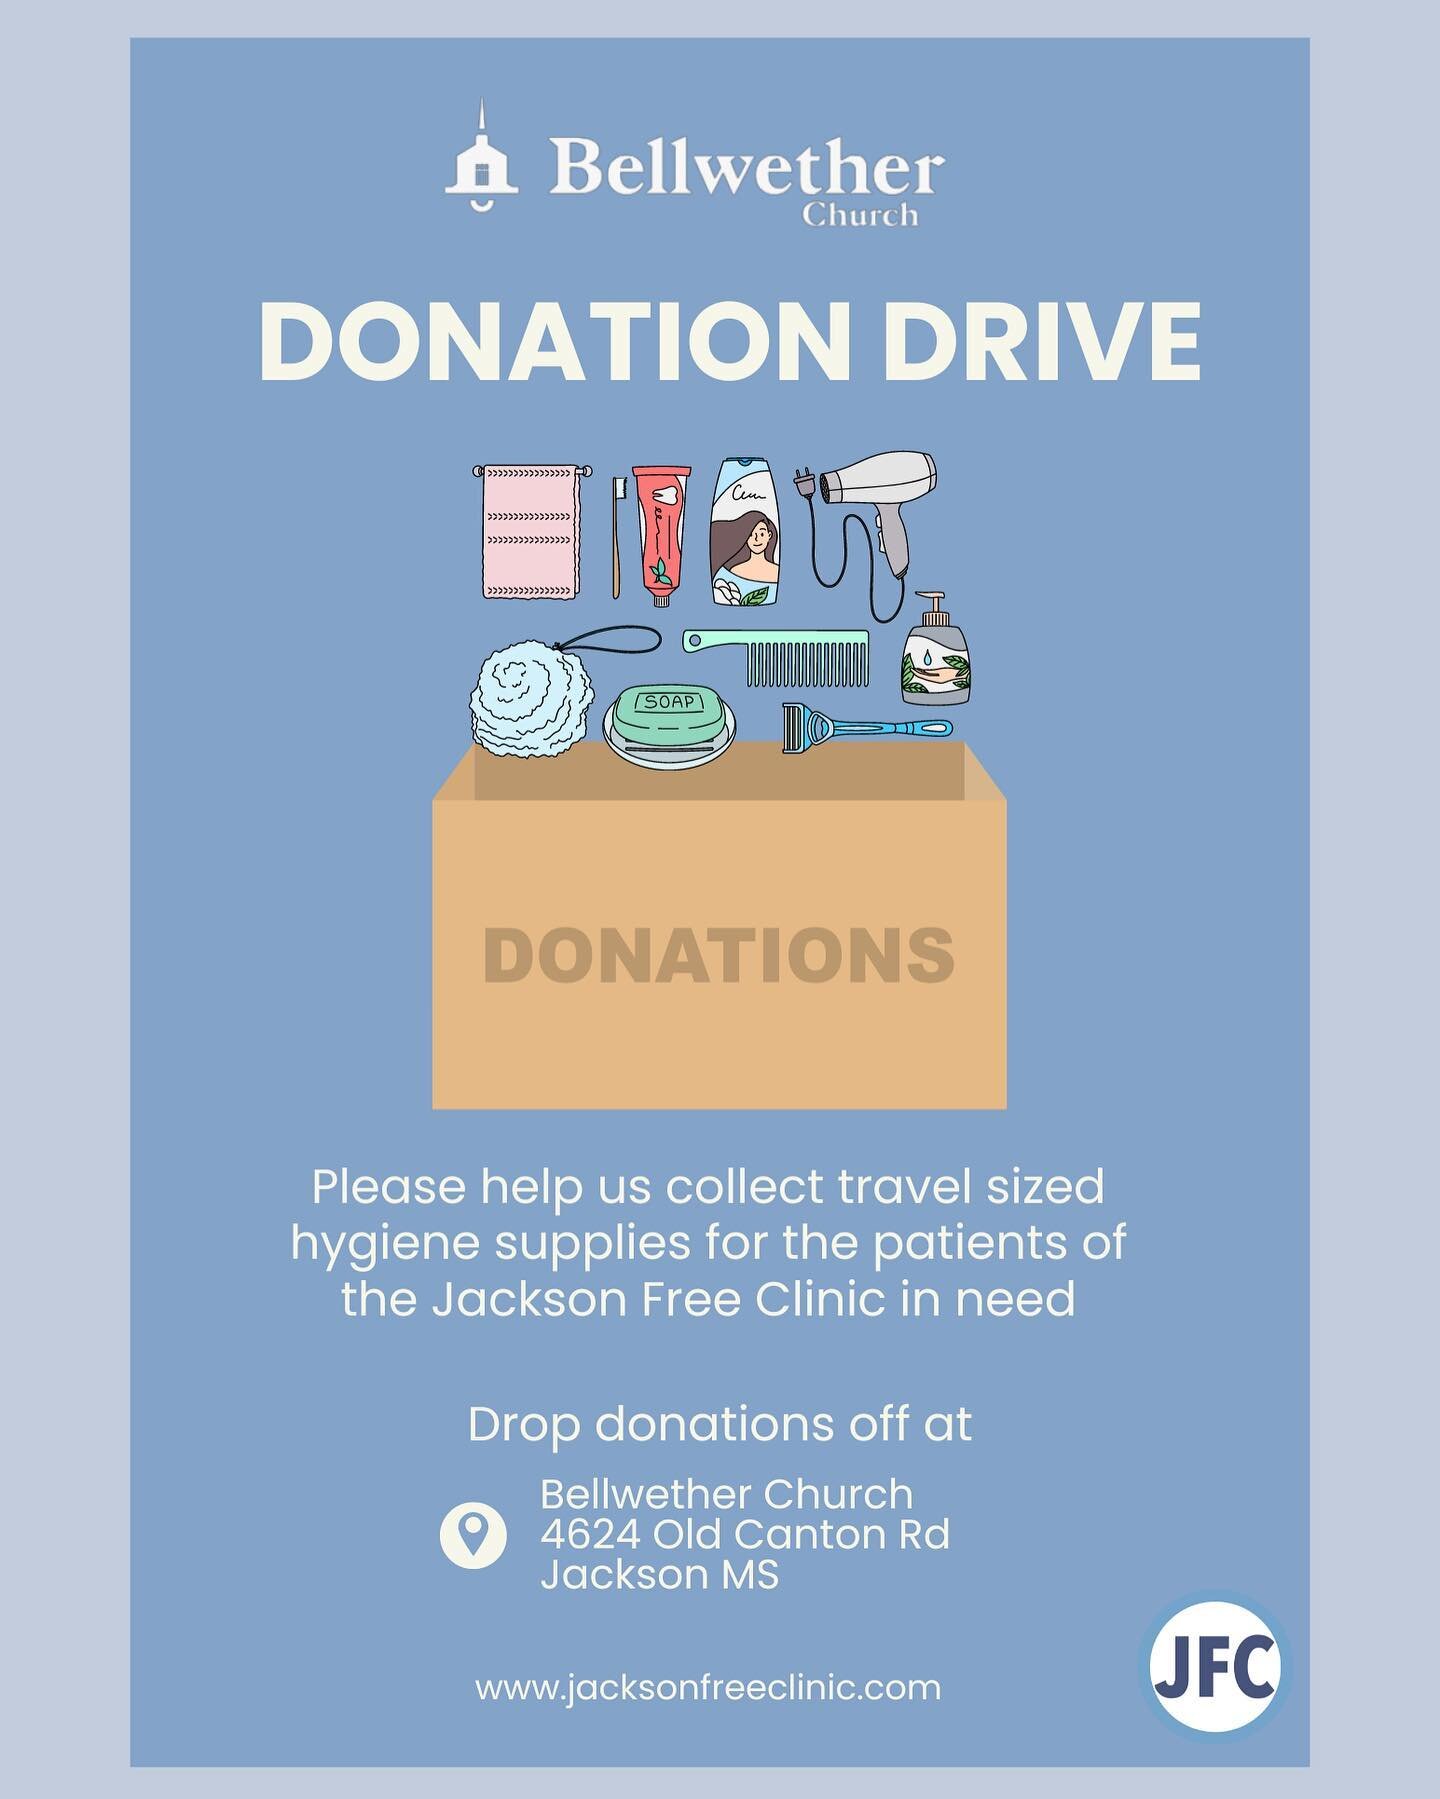 Join us as we collect travel sizes hygiene supplies for our friends at @jacksonfreeclinic ! Drop off available at Bellwether offices (during office hours), or on Sunday mornings! 

The Jackson Free Clinic proceeds free healthcare for uninsured Missis